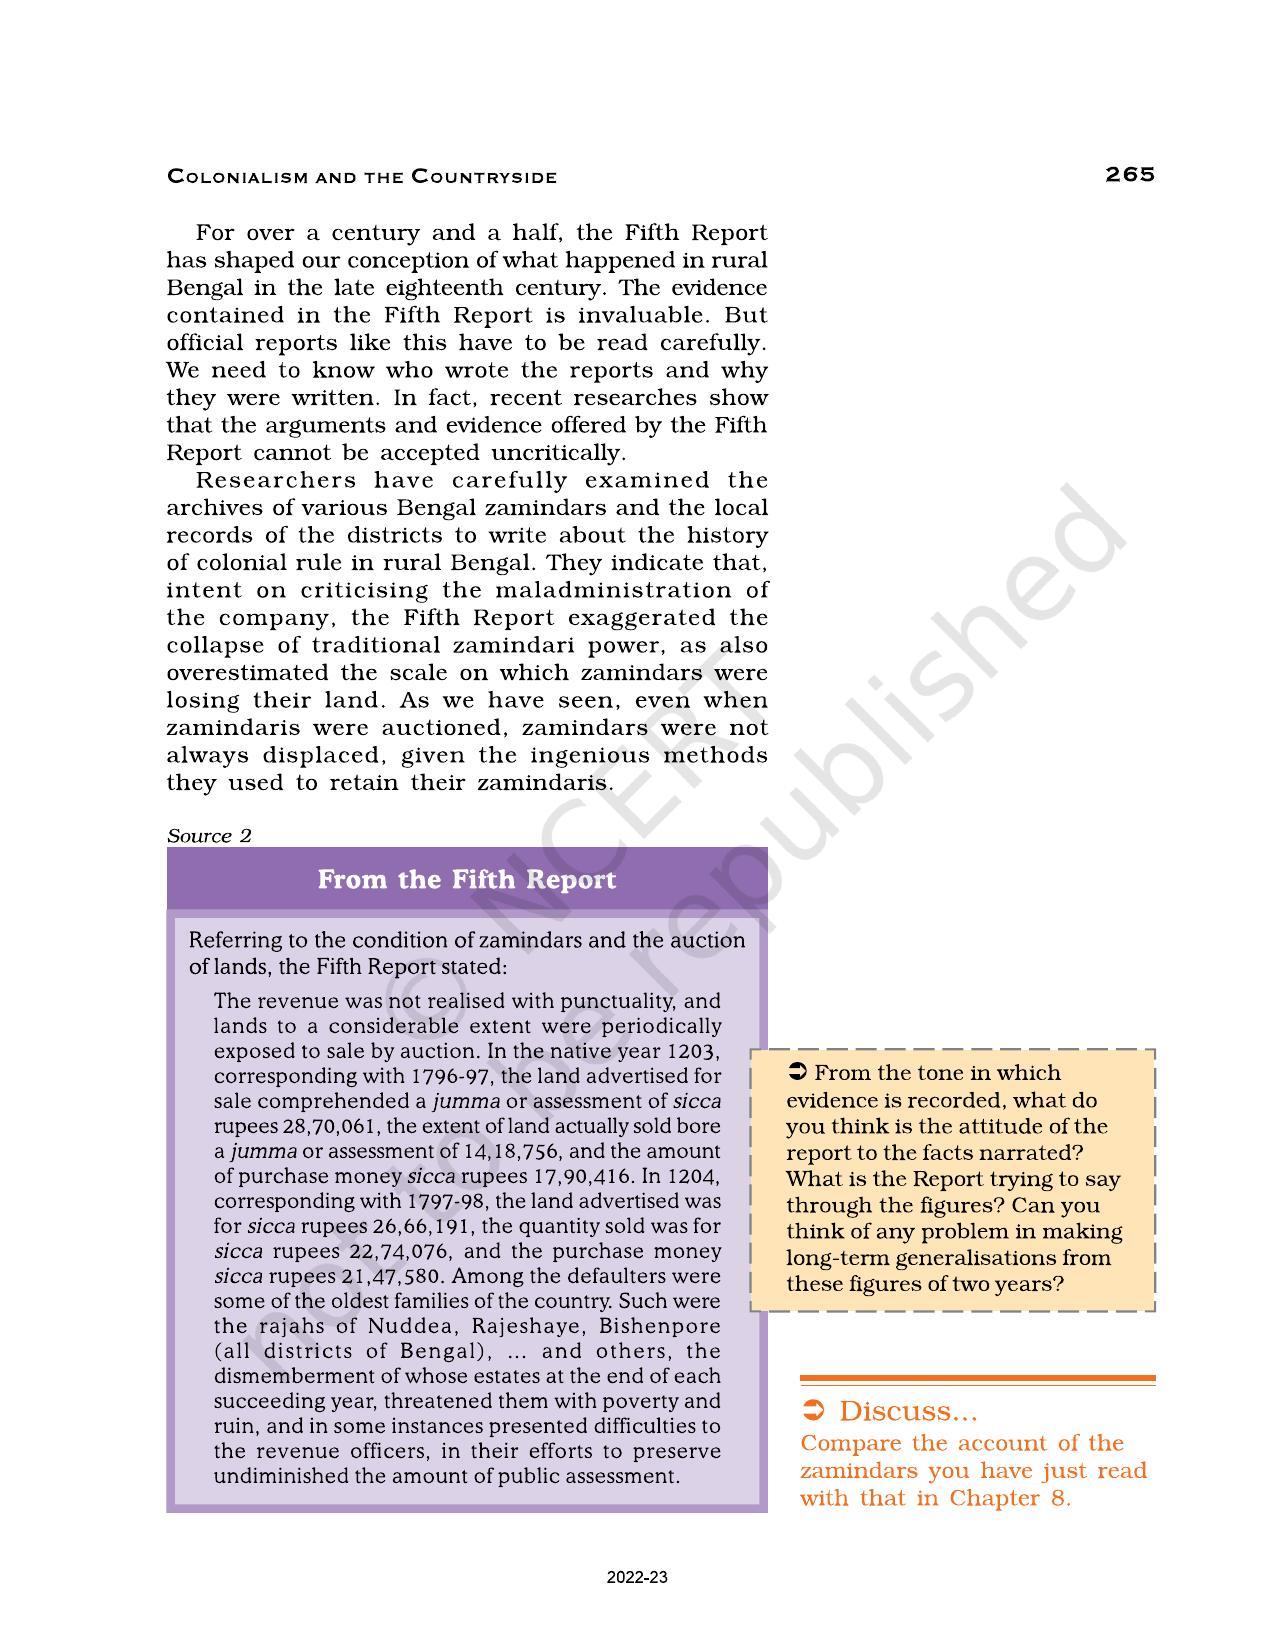 NCERT Book for Class 12 History (Part-II) Chapter 10 Colonialism and the Countryside - Page 9